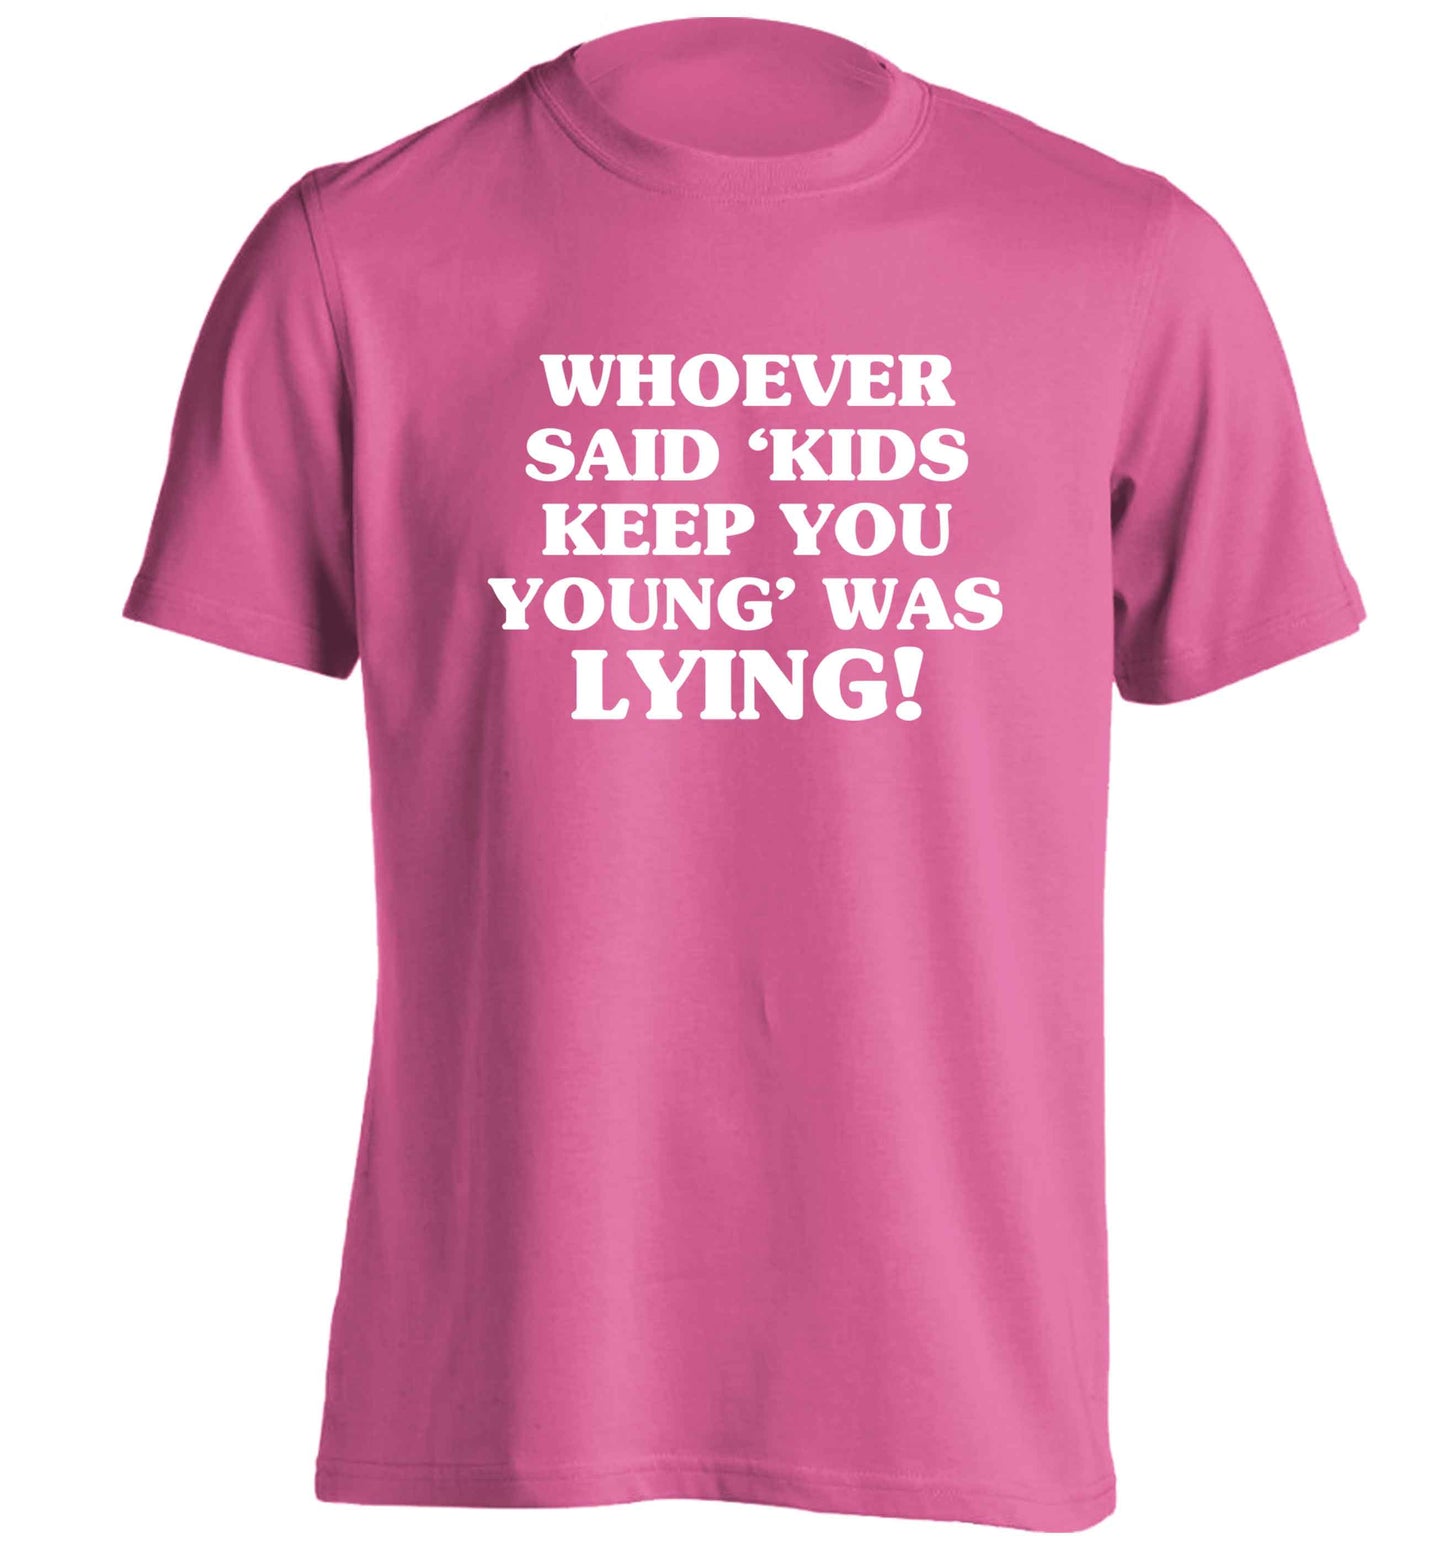 Whoever said 'kids keep you young' was lying! adults unisex pink Tshirt 2XL